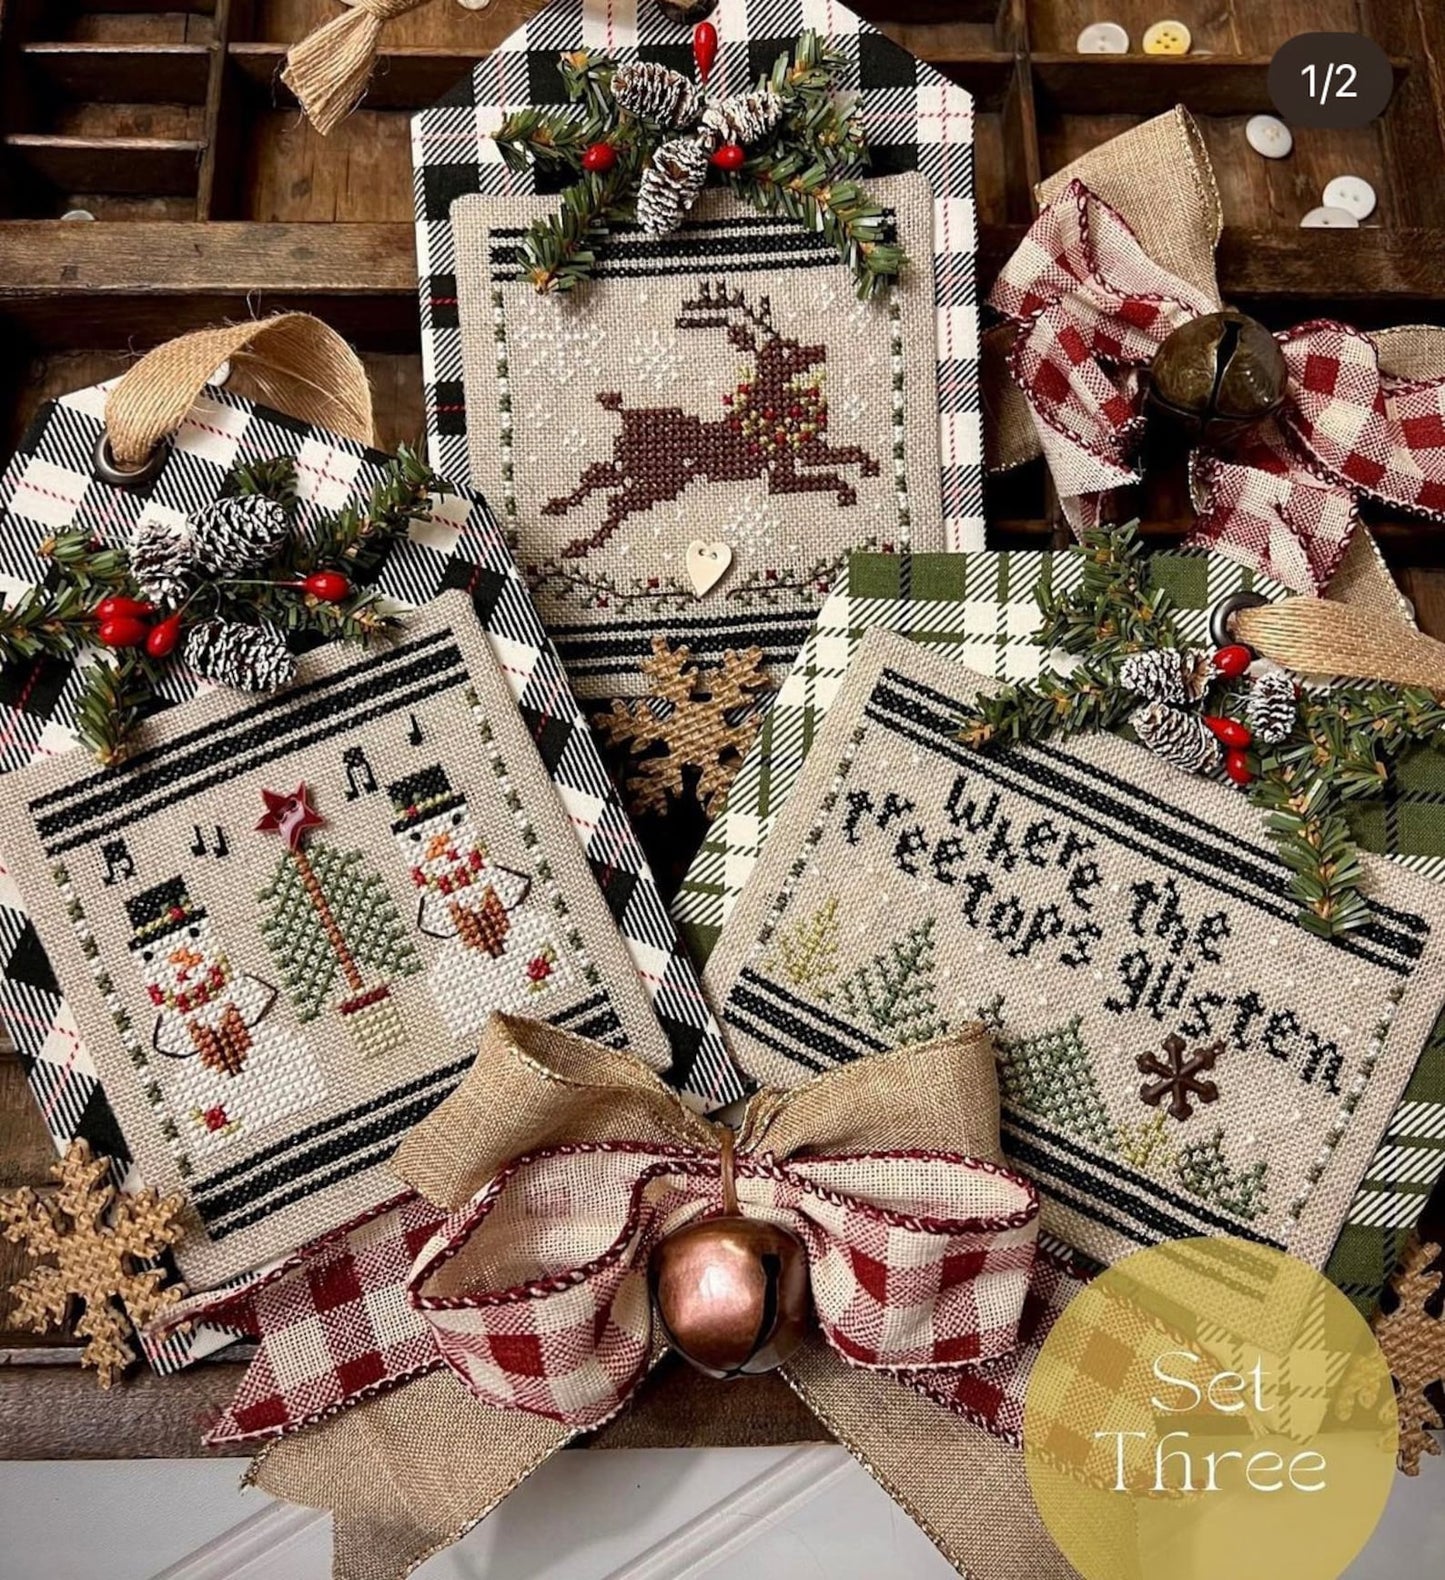 Christmas in the Country Set 3 cross-stitch pattern by Annie Beez Folk Art